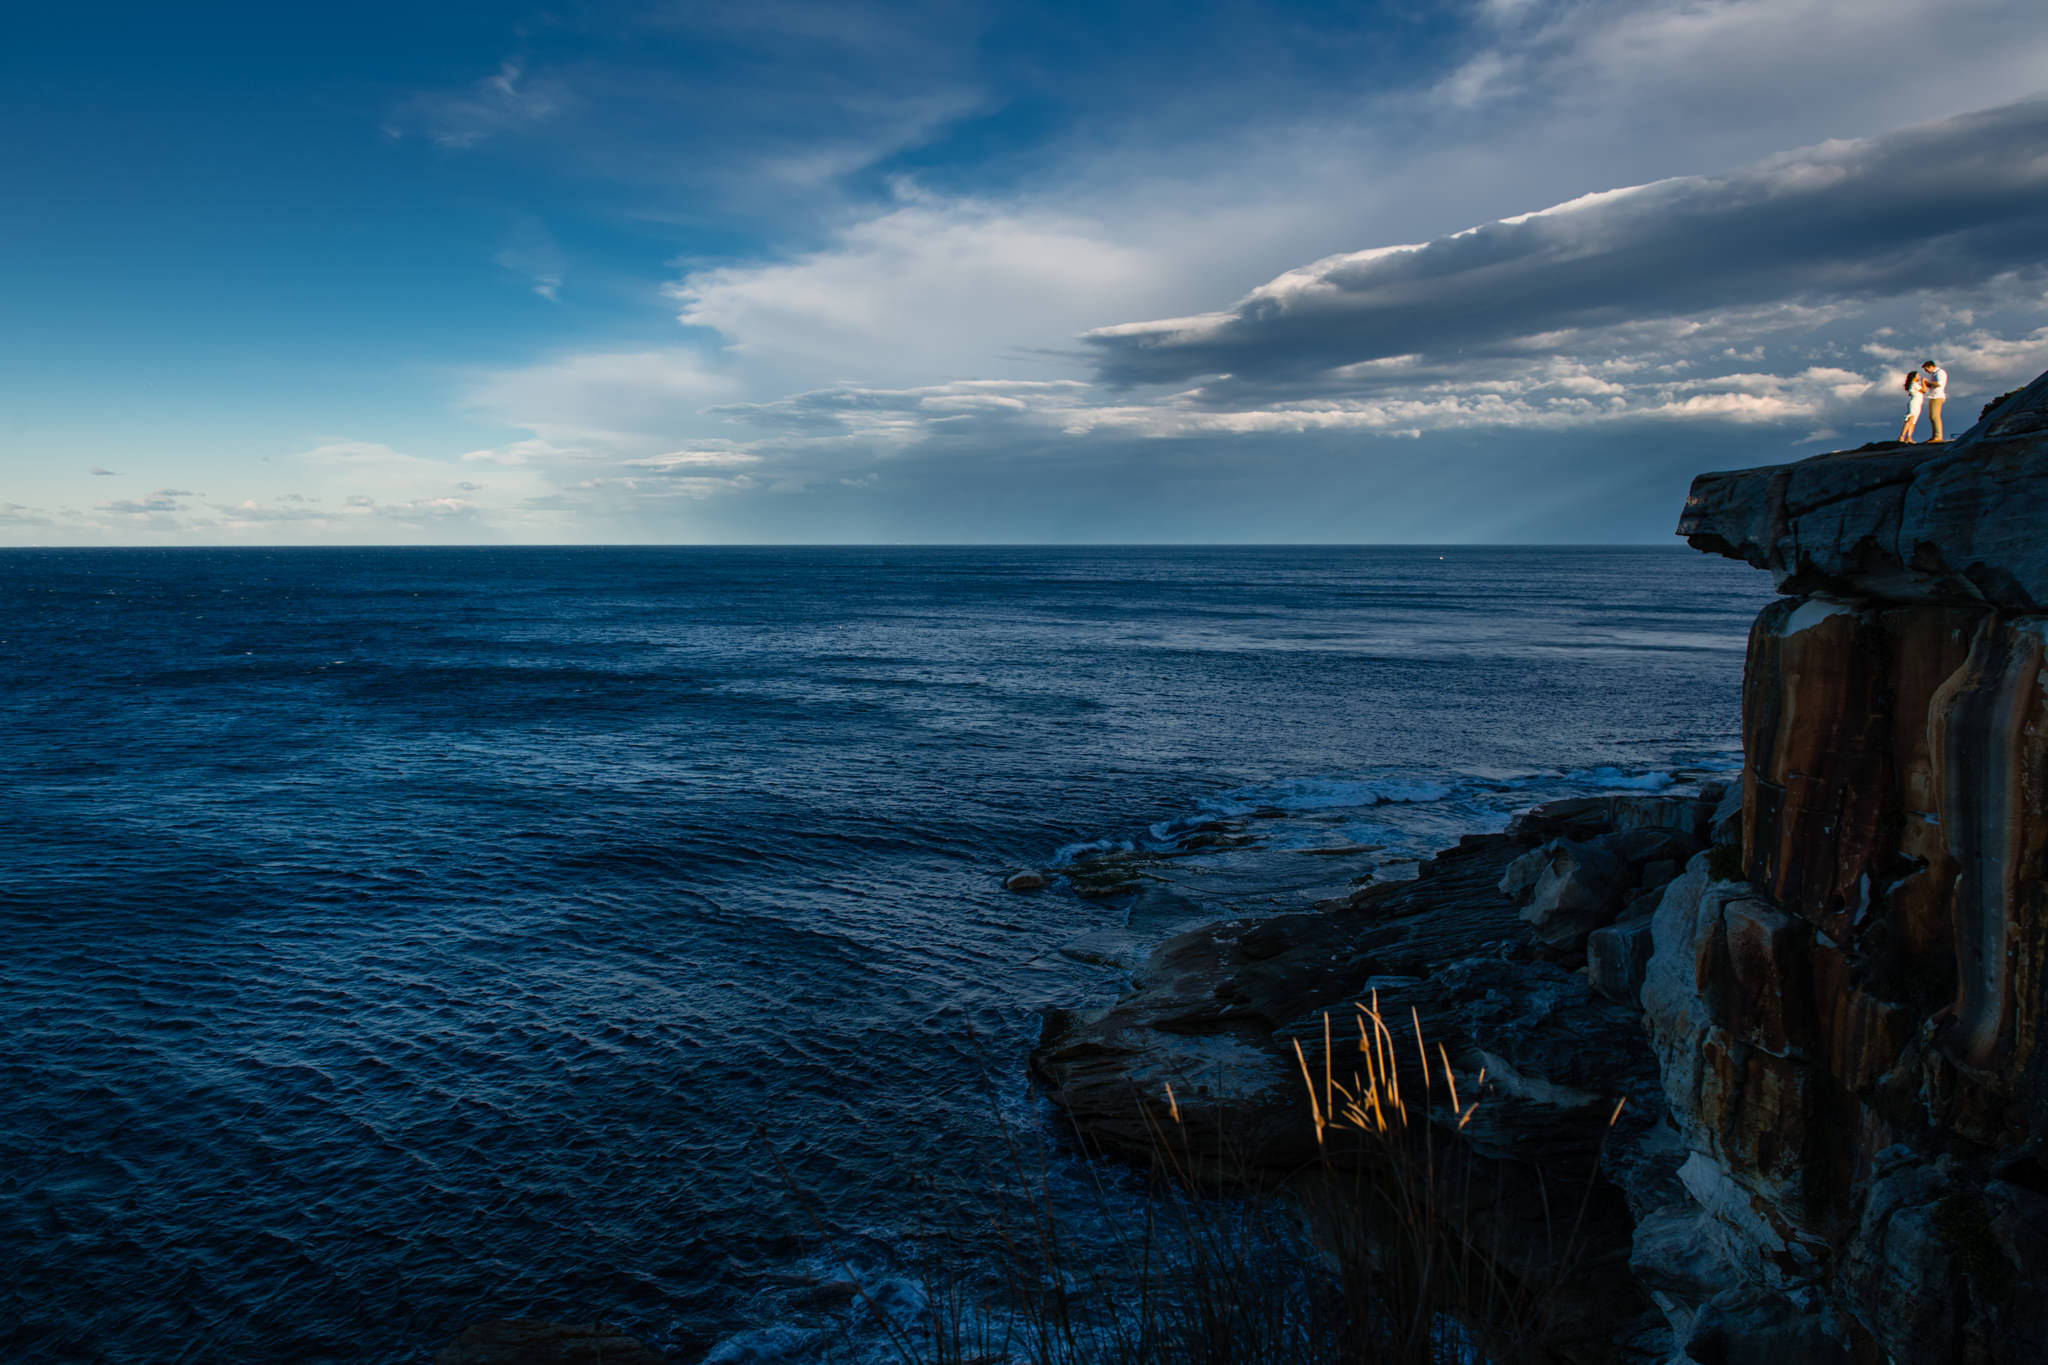 Panoramic view of the ocean from South head with couple dancing on a cliff top